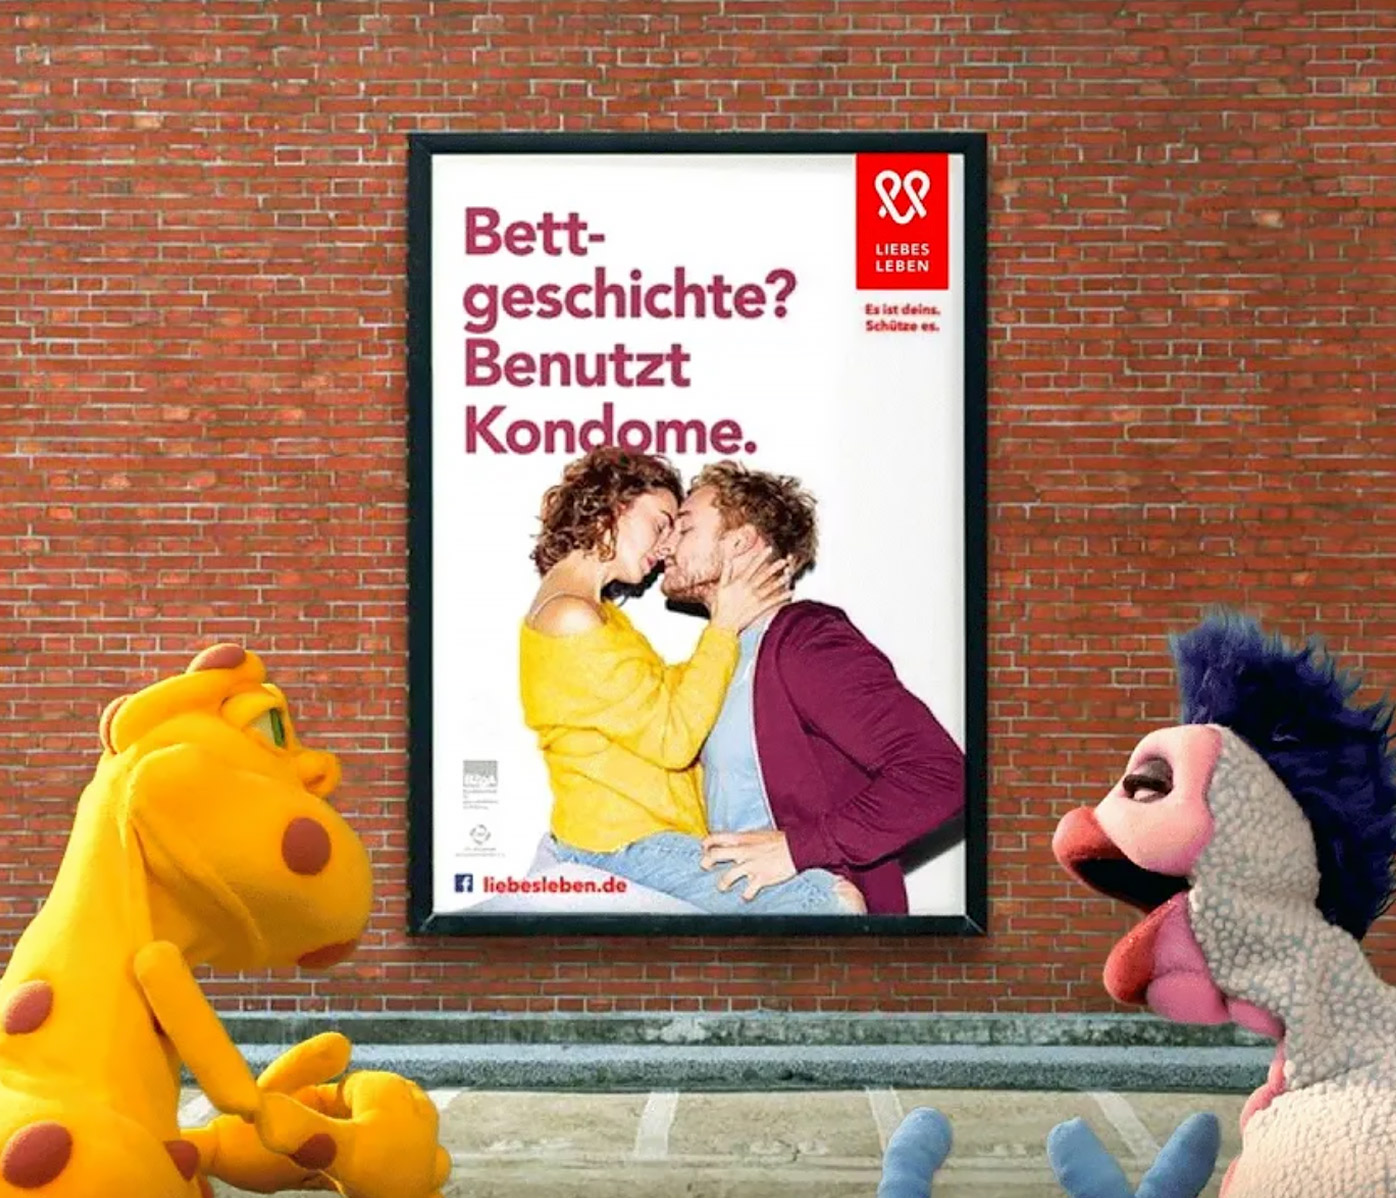 In the foreground, two puppets of the Infectious STI are talking. In the background is a wall with a poster from the Love Life campaign with the inscription "Bettgeschichte? Use condoms". On the poster, a man and a woman are kissing.